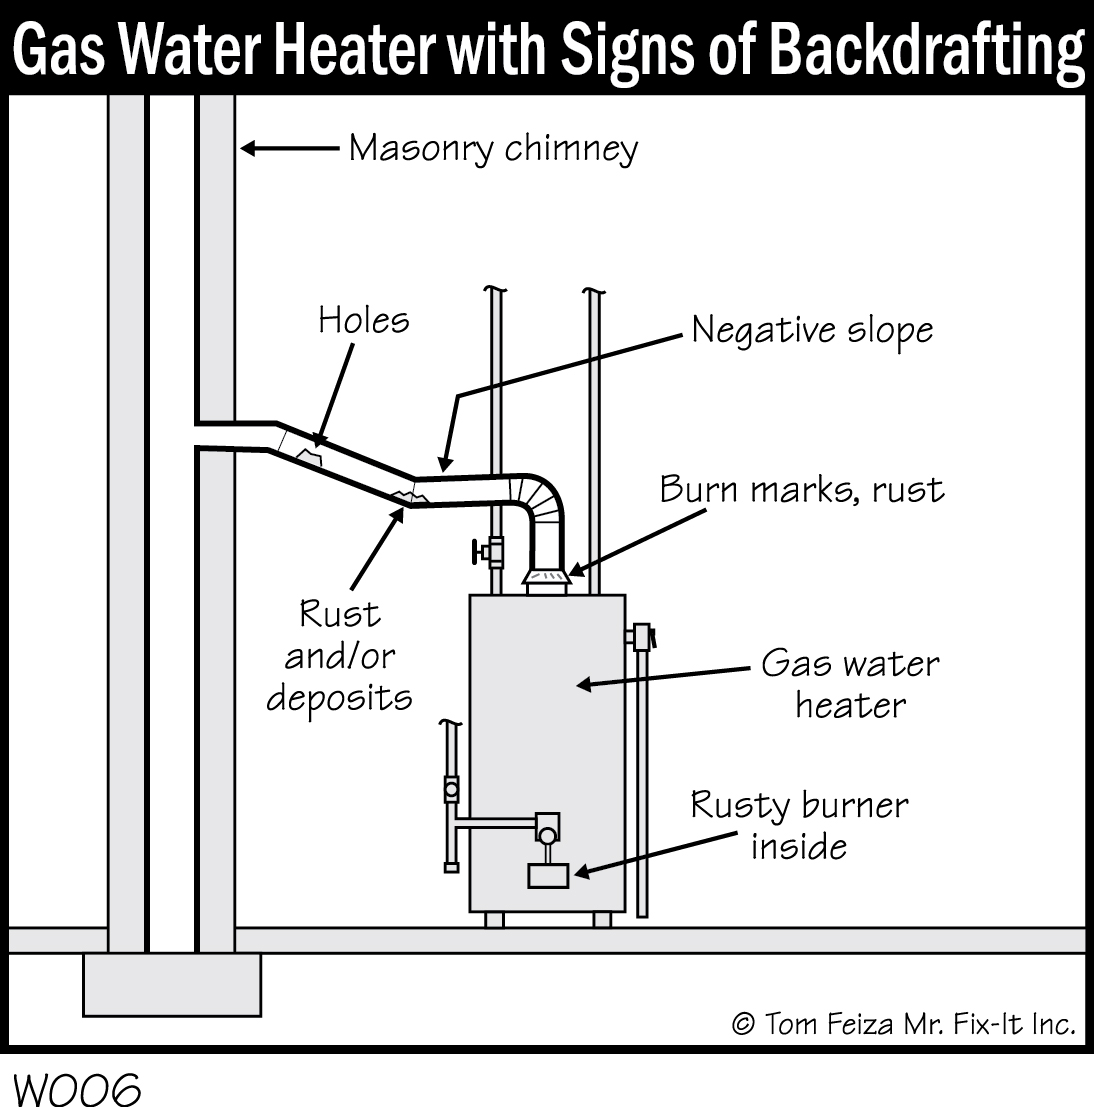 W006 - Gas Water Heater with Signs of Backdrafting